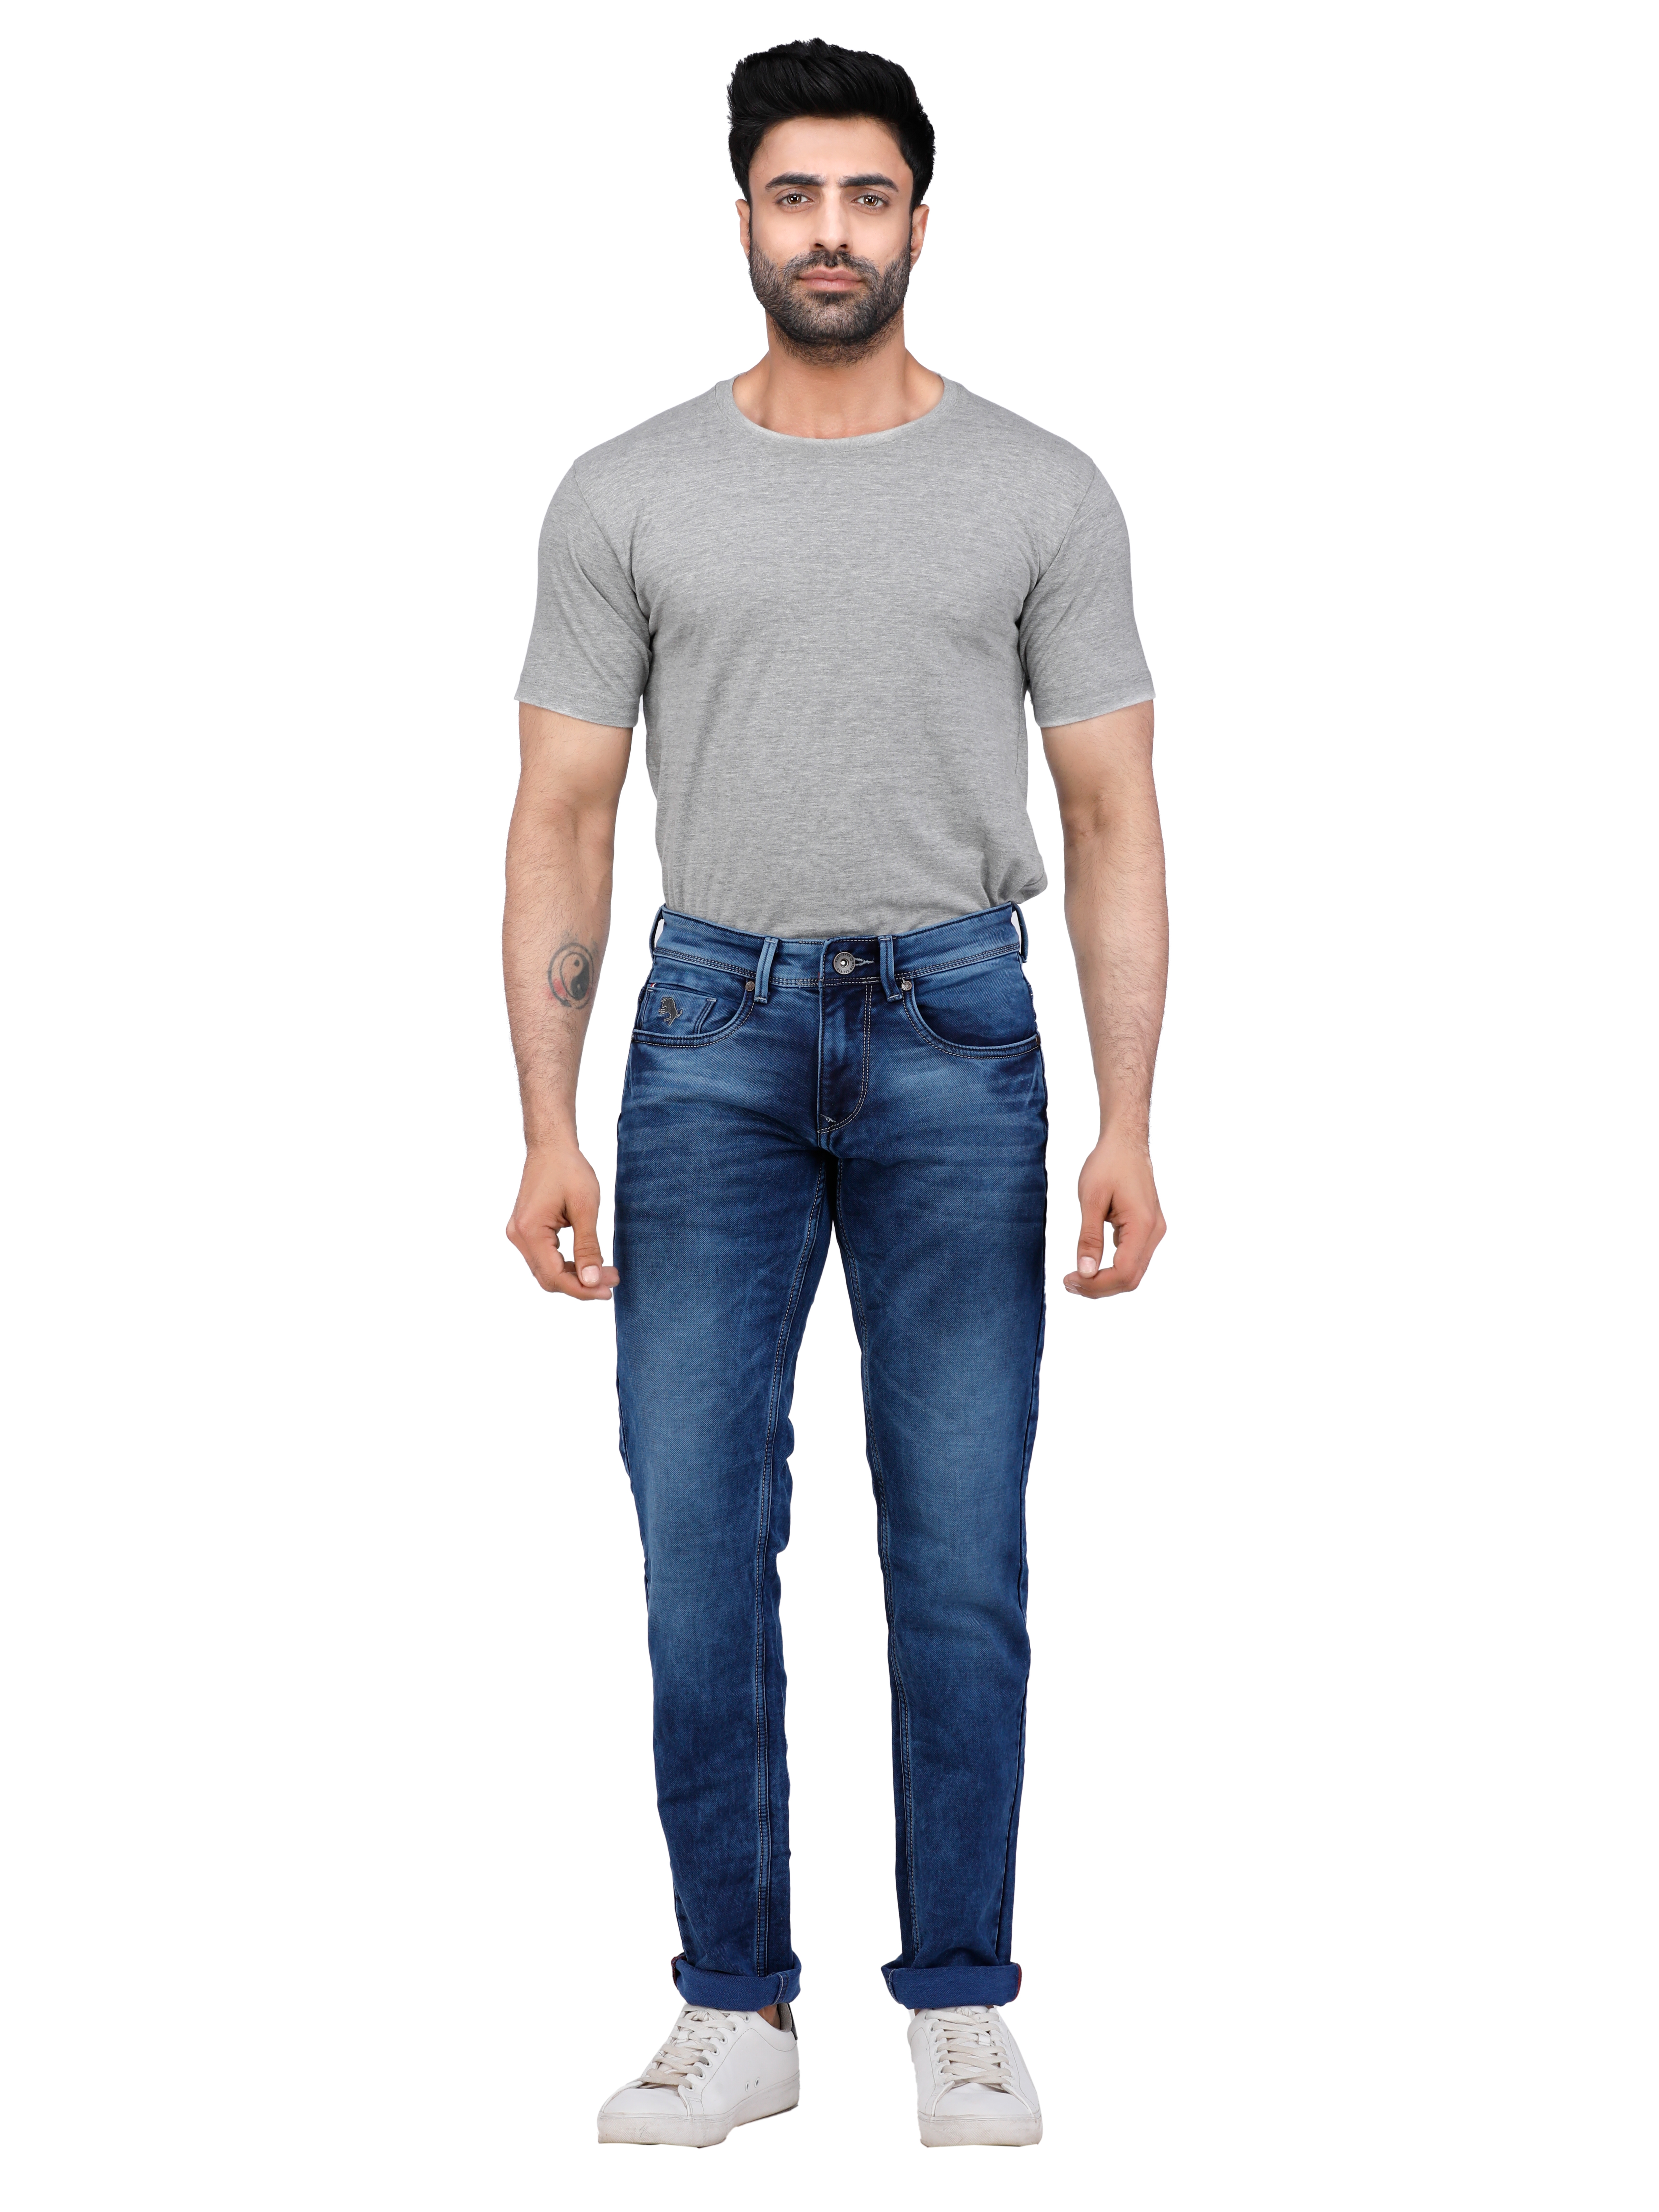 D'cot by Donear | D'cot by Donear Men Blue Cotton Skinny Solid Jeans 4